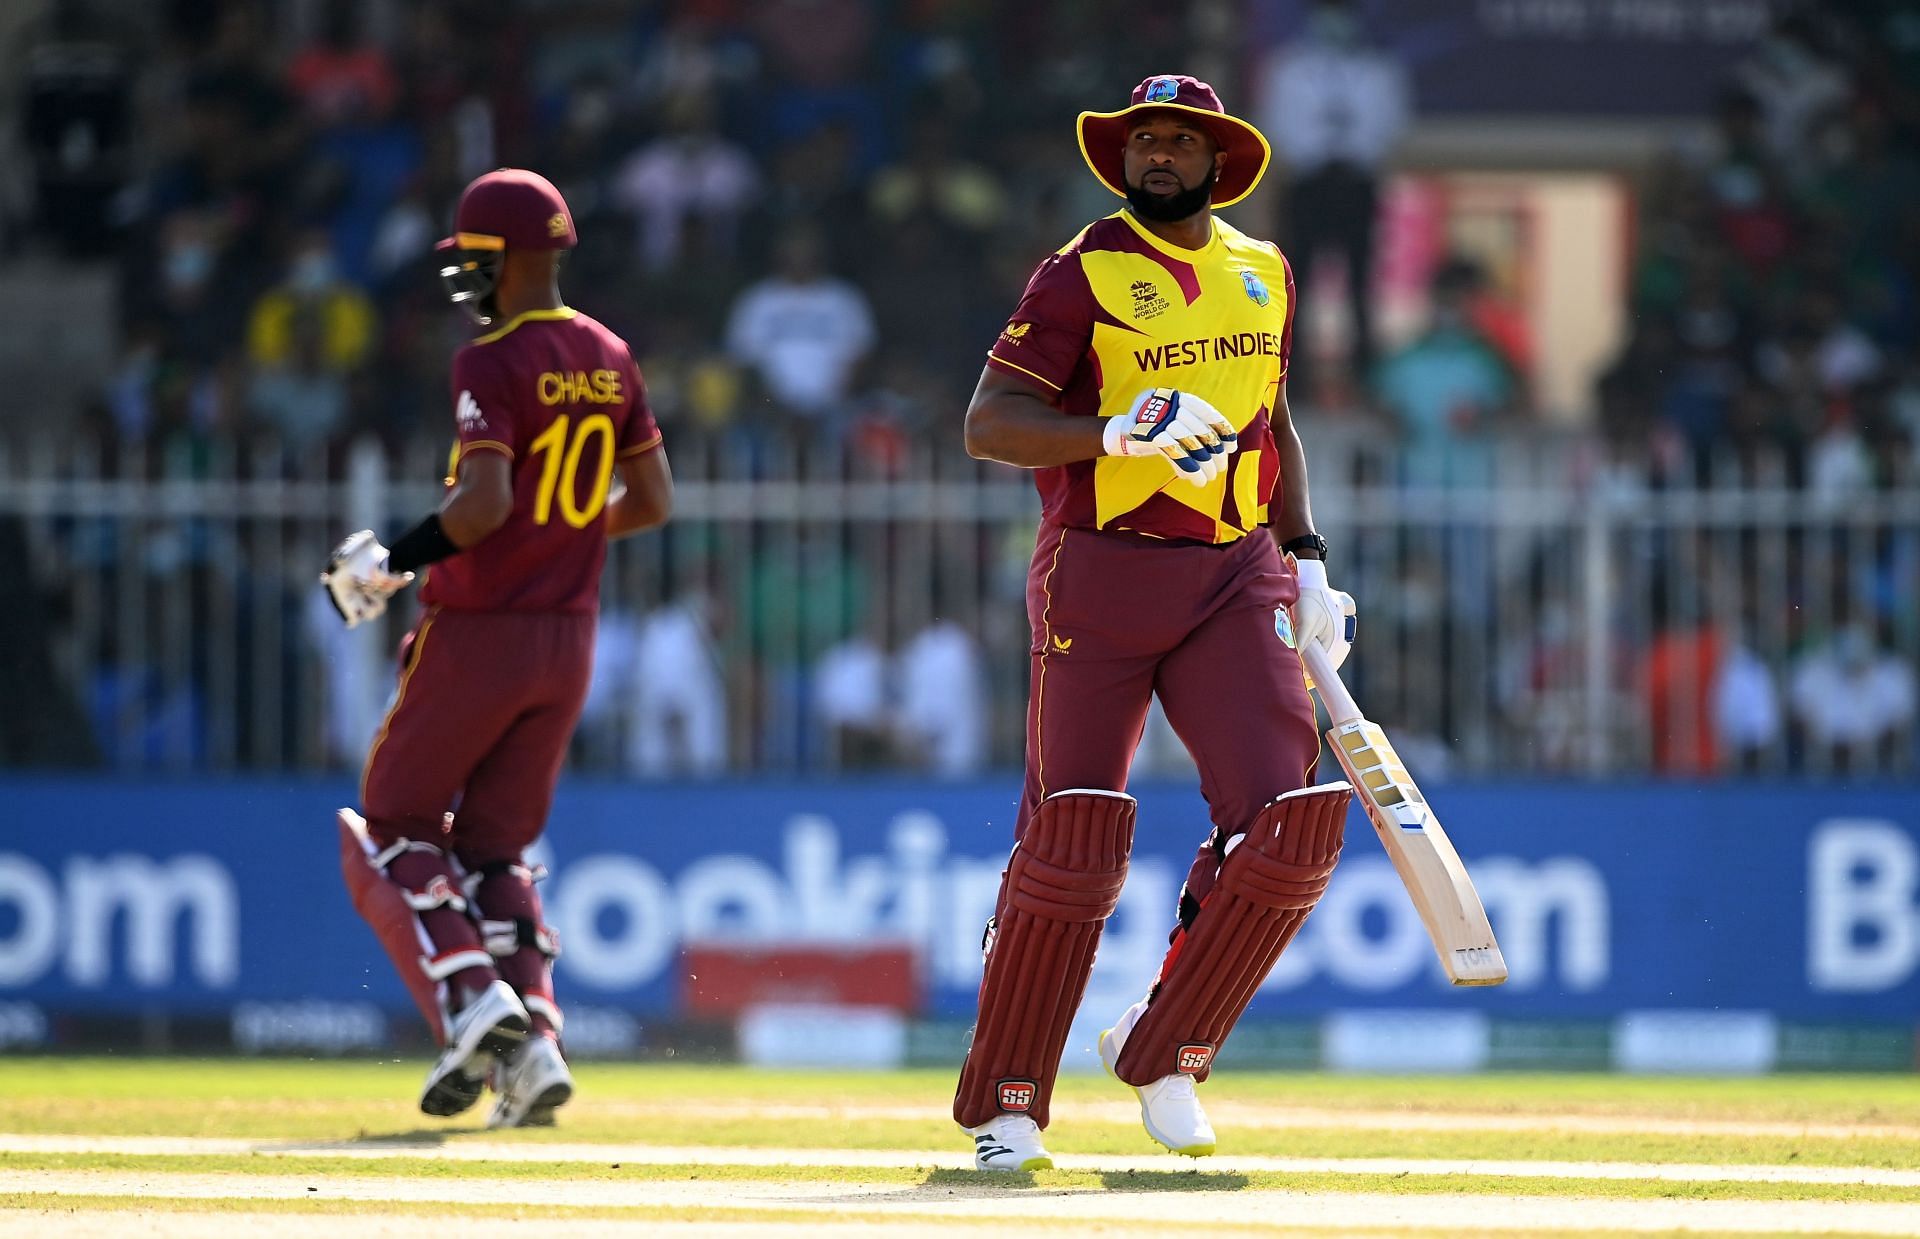 A plethora of West Indies players ply their trade in leagues around the world